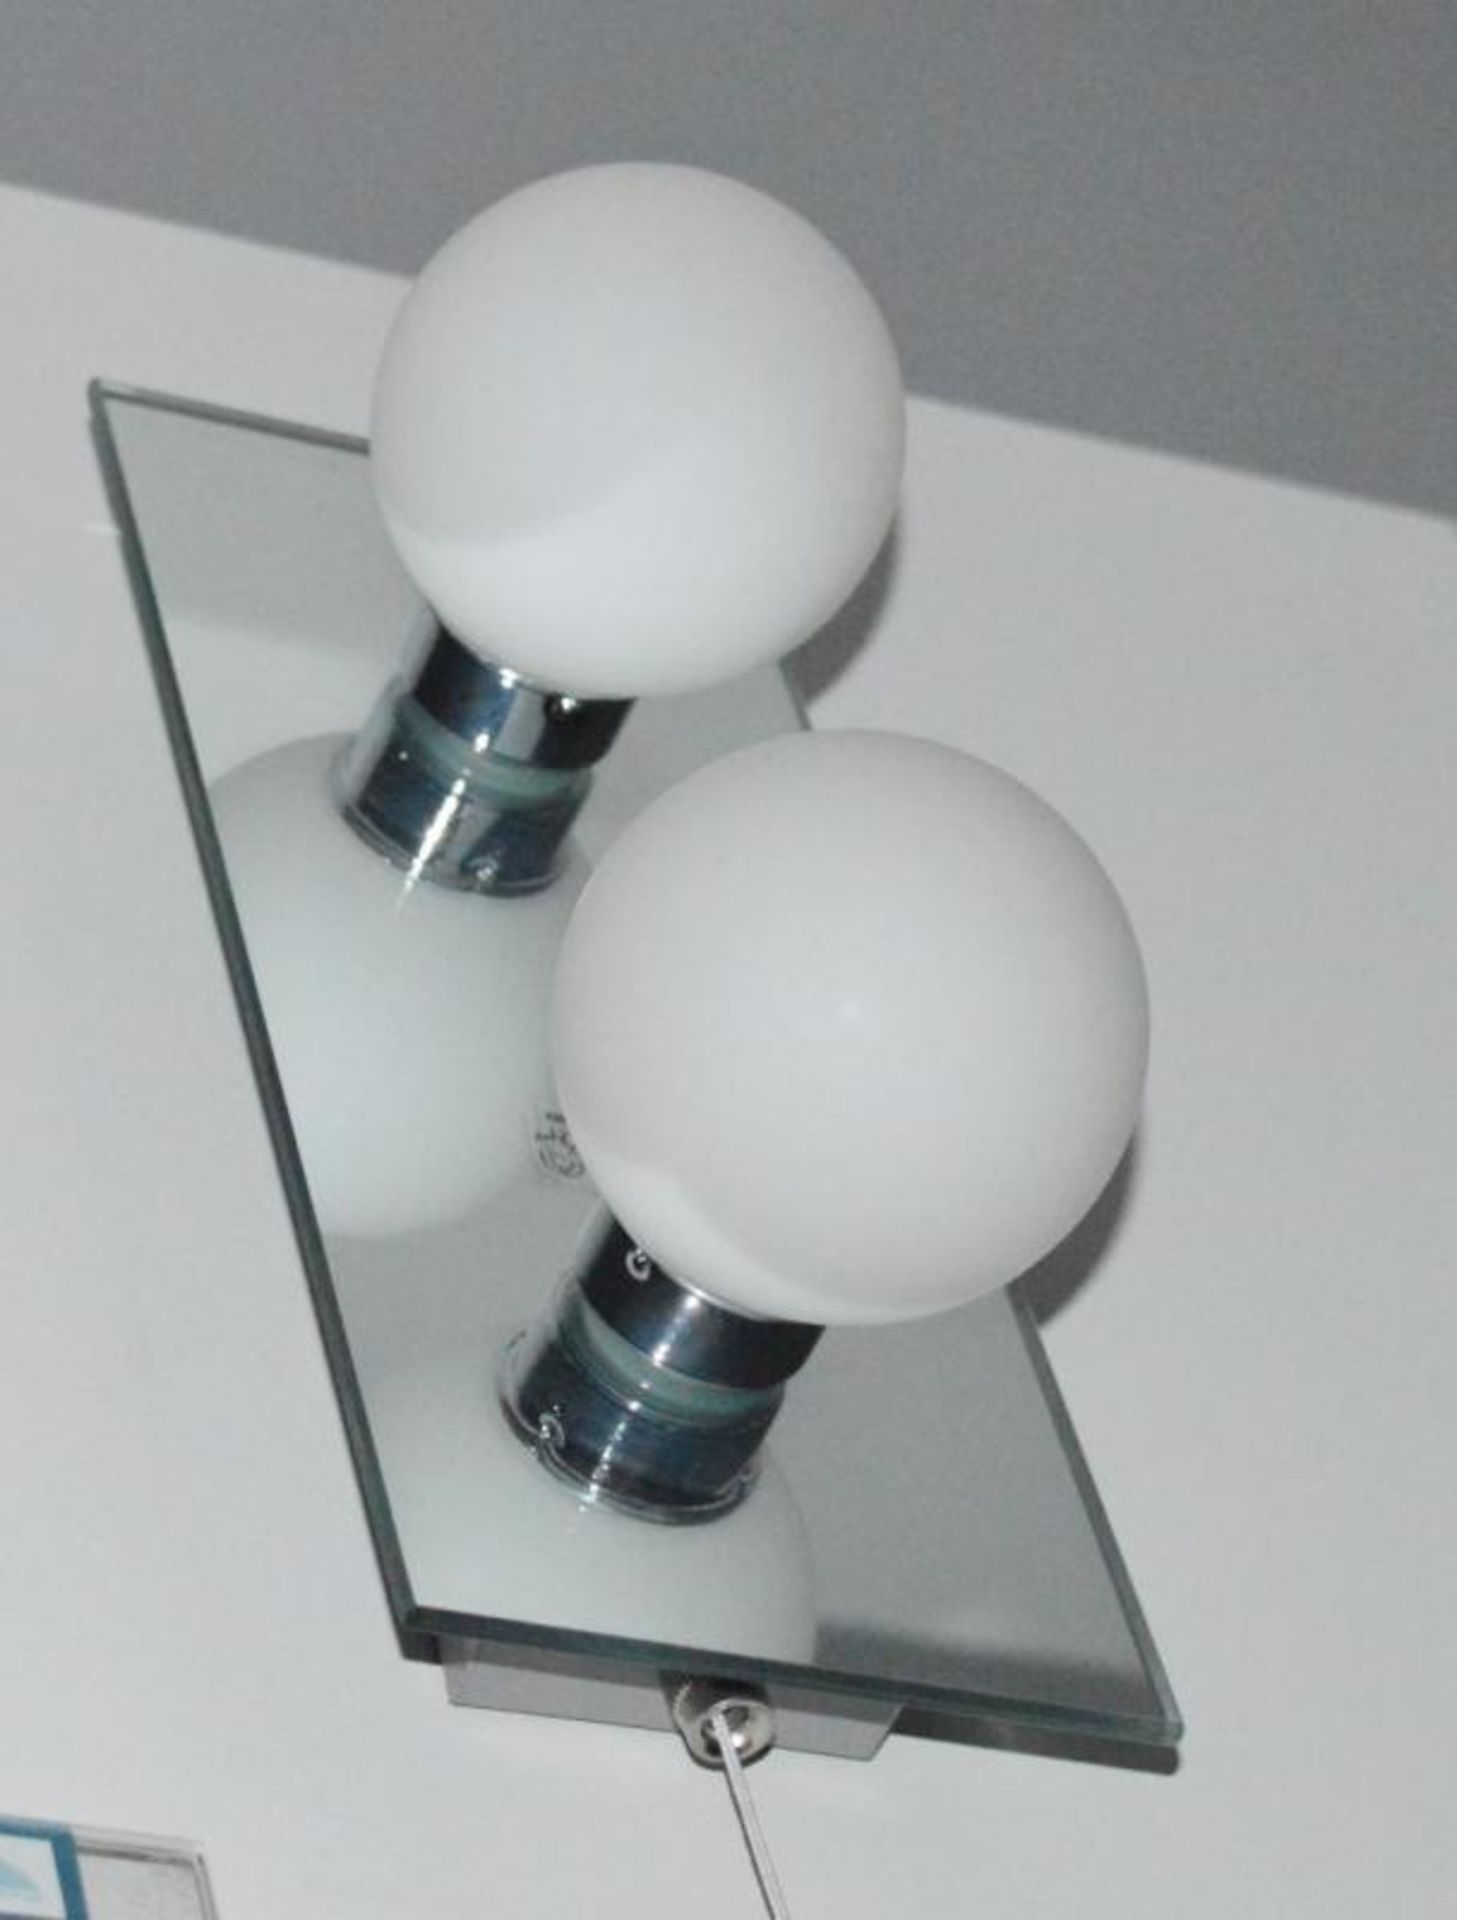 1 x Globe Wall Light With Chrome and Opal Glass Finish - IP44 Rated Suitable For Bathrooms - Ex Disp